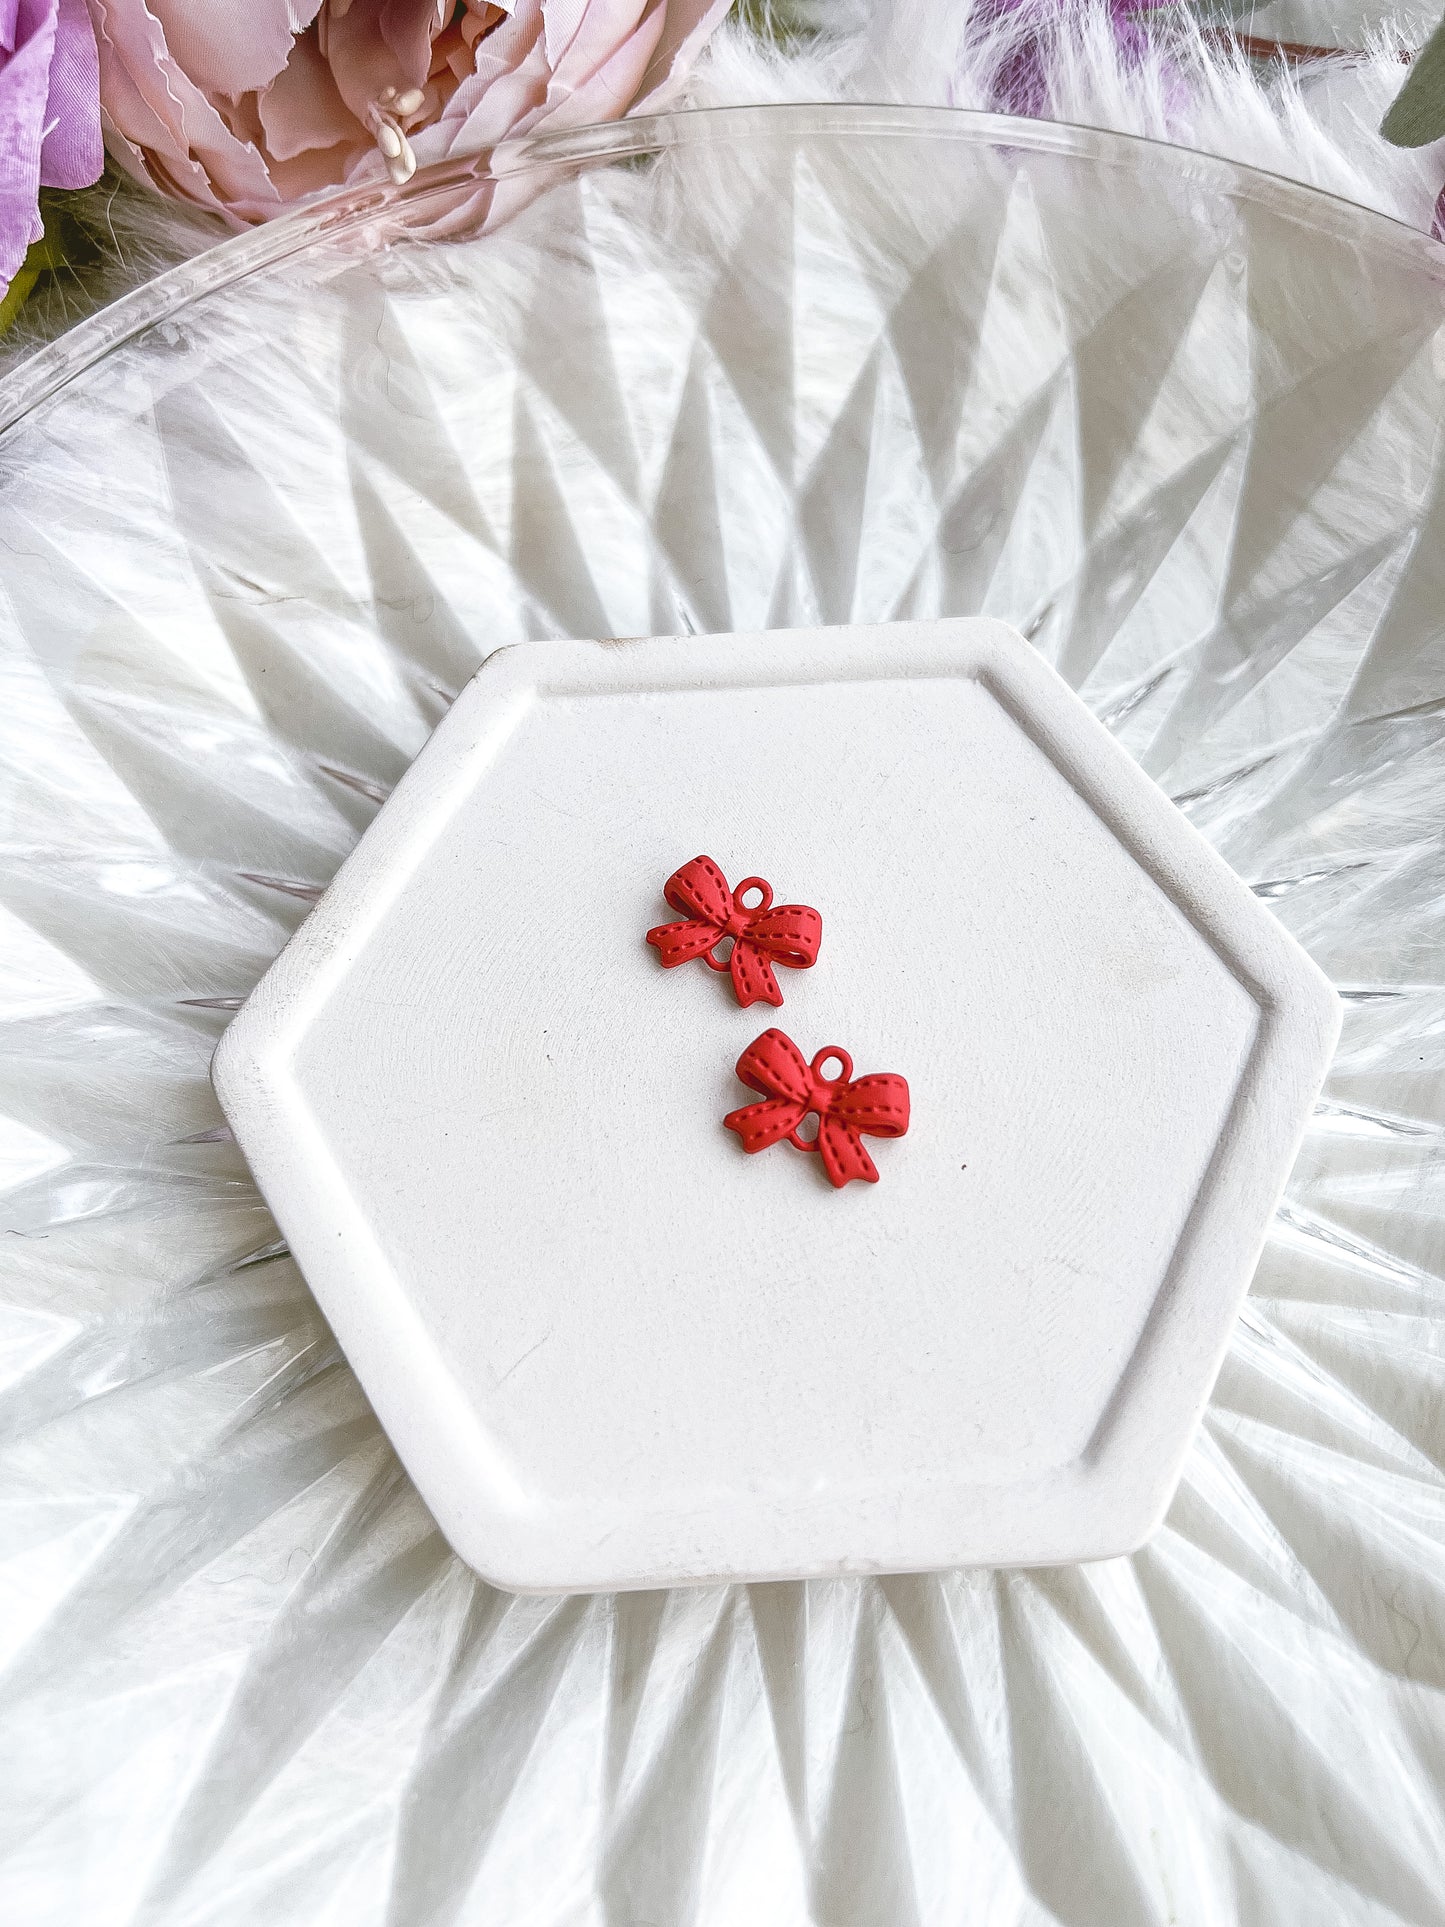 Red Ribbon Bow Connector -10 PIECES